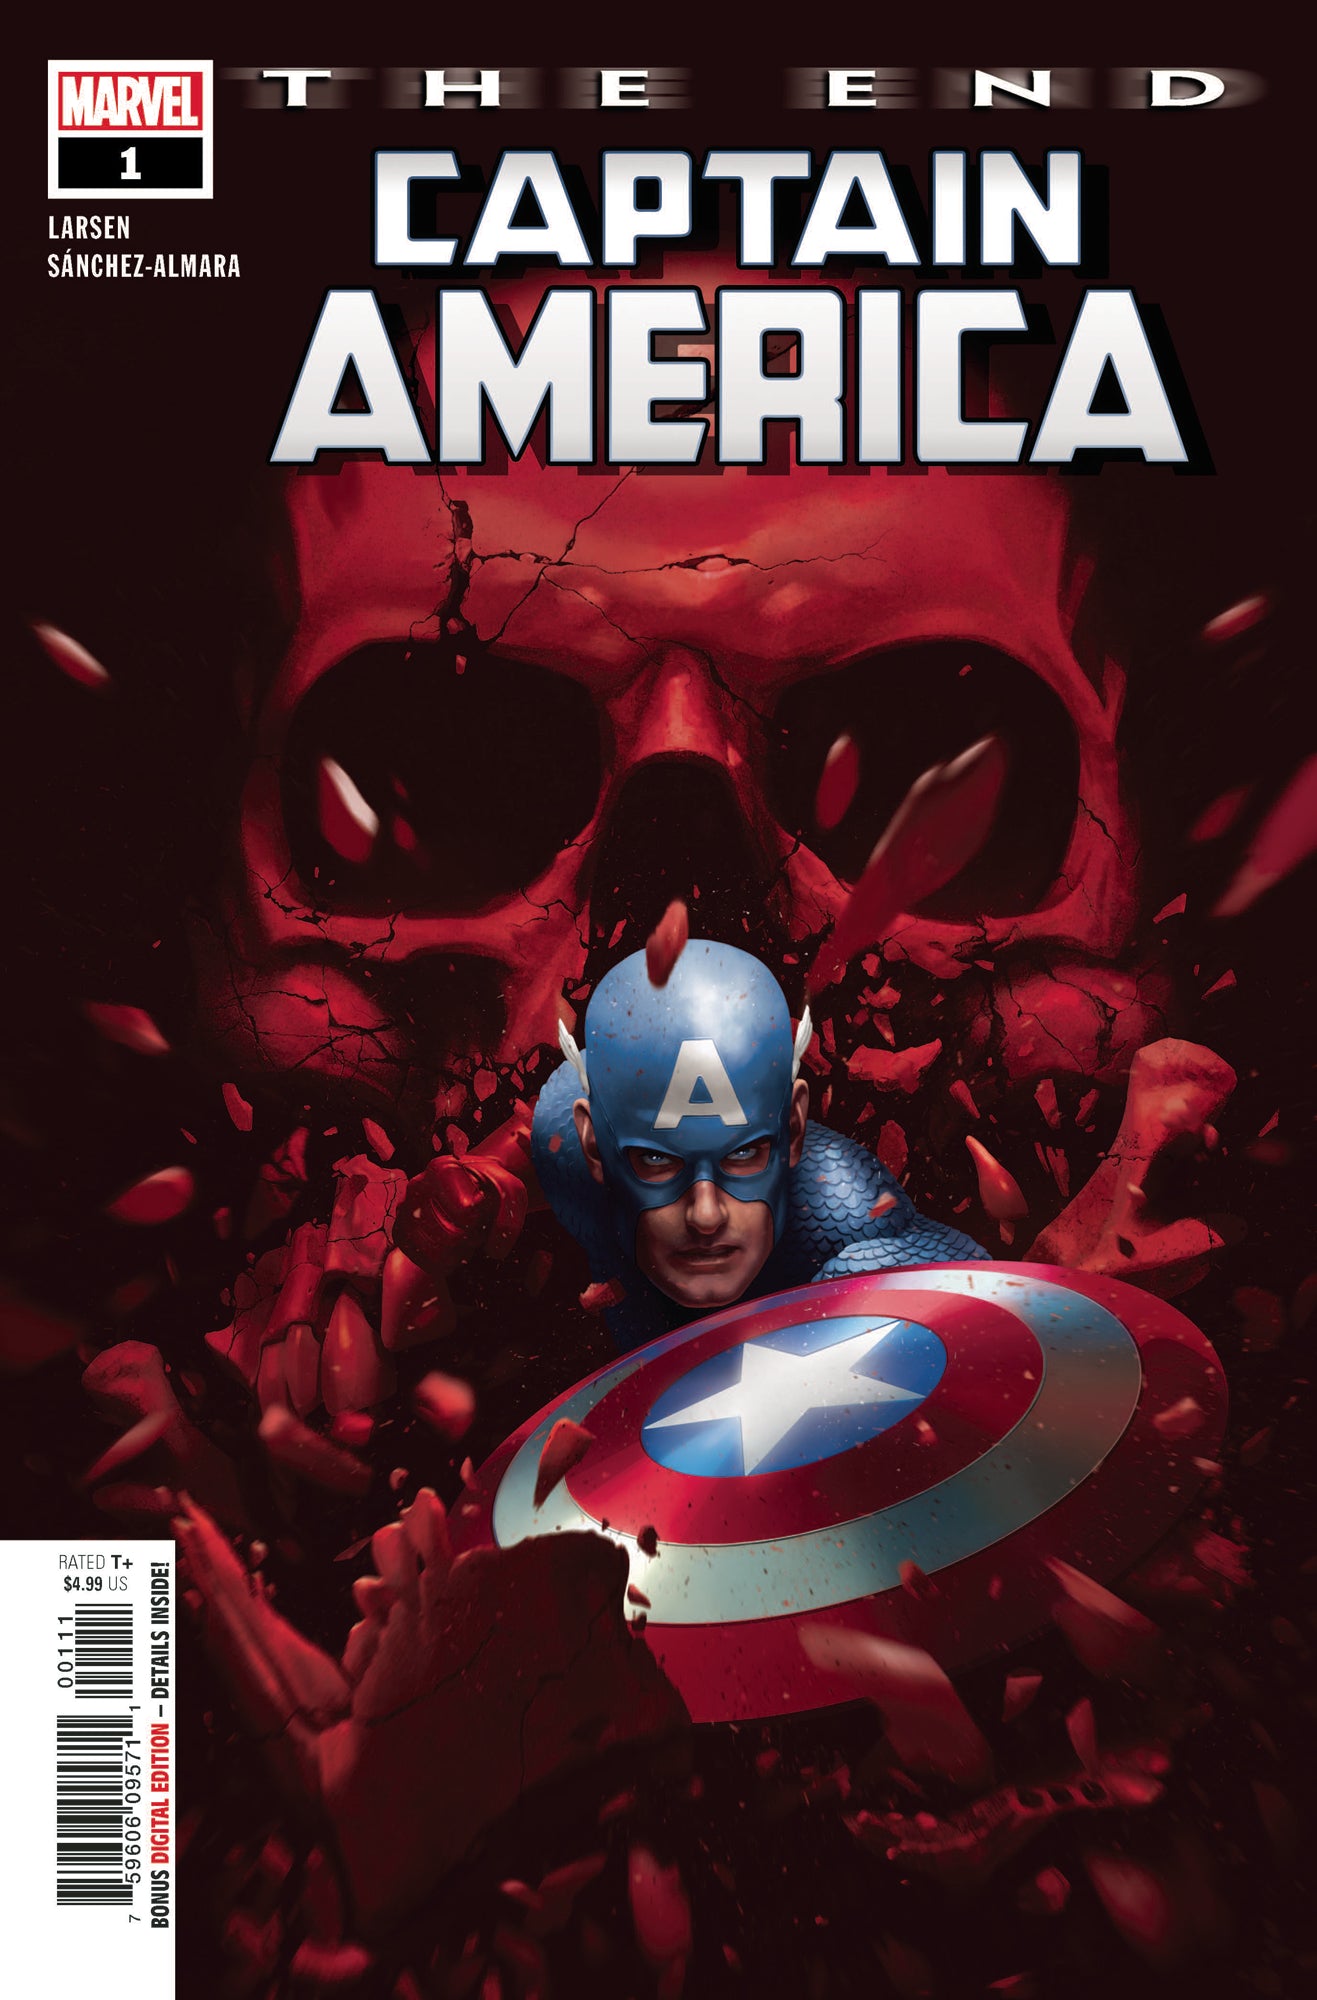 CAPTAIN AMERICA THE END #1 | Game Master's Emporium (The New GME)